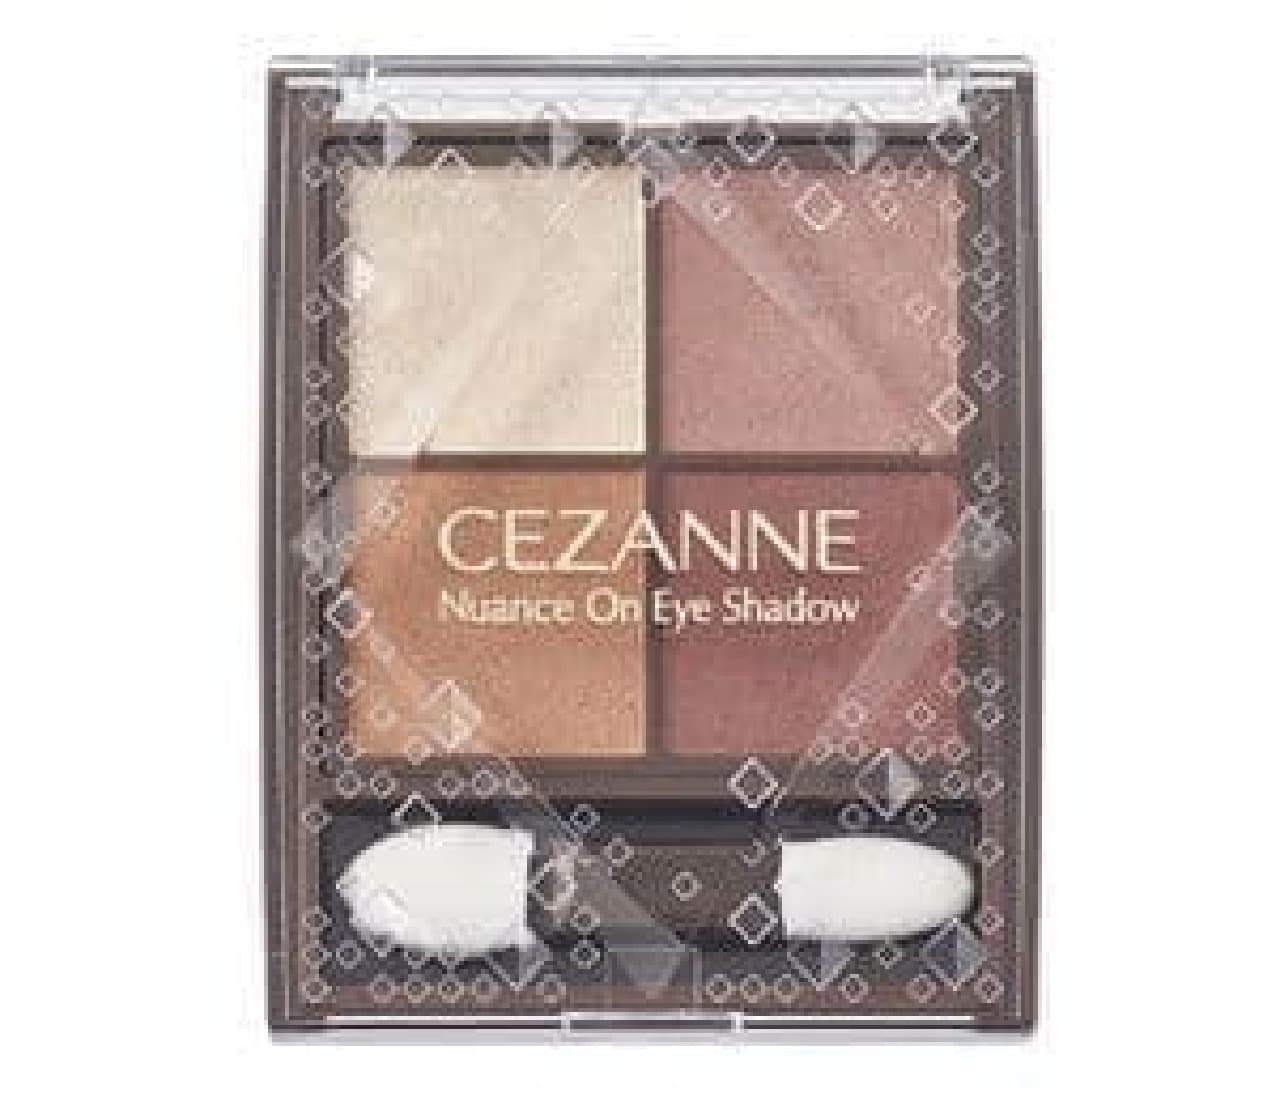 Cezanne "Nuance on Eyeshadow" New Color "04 Camel Brown"